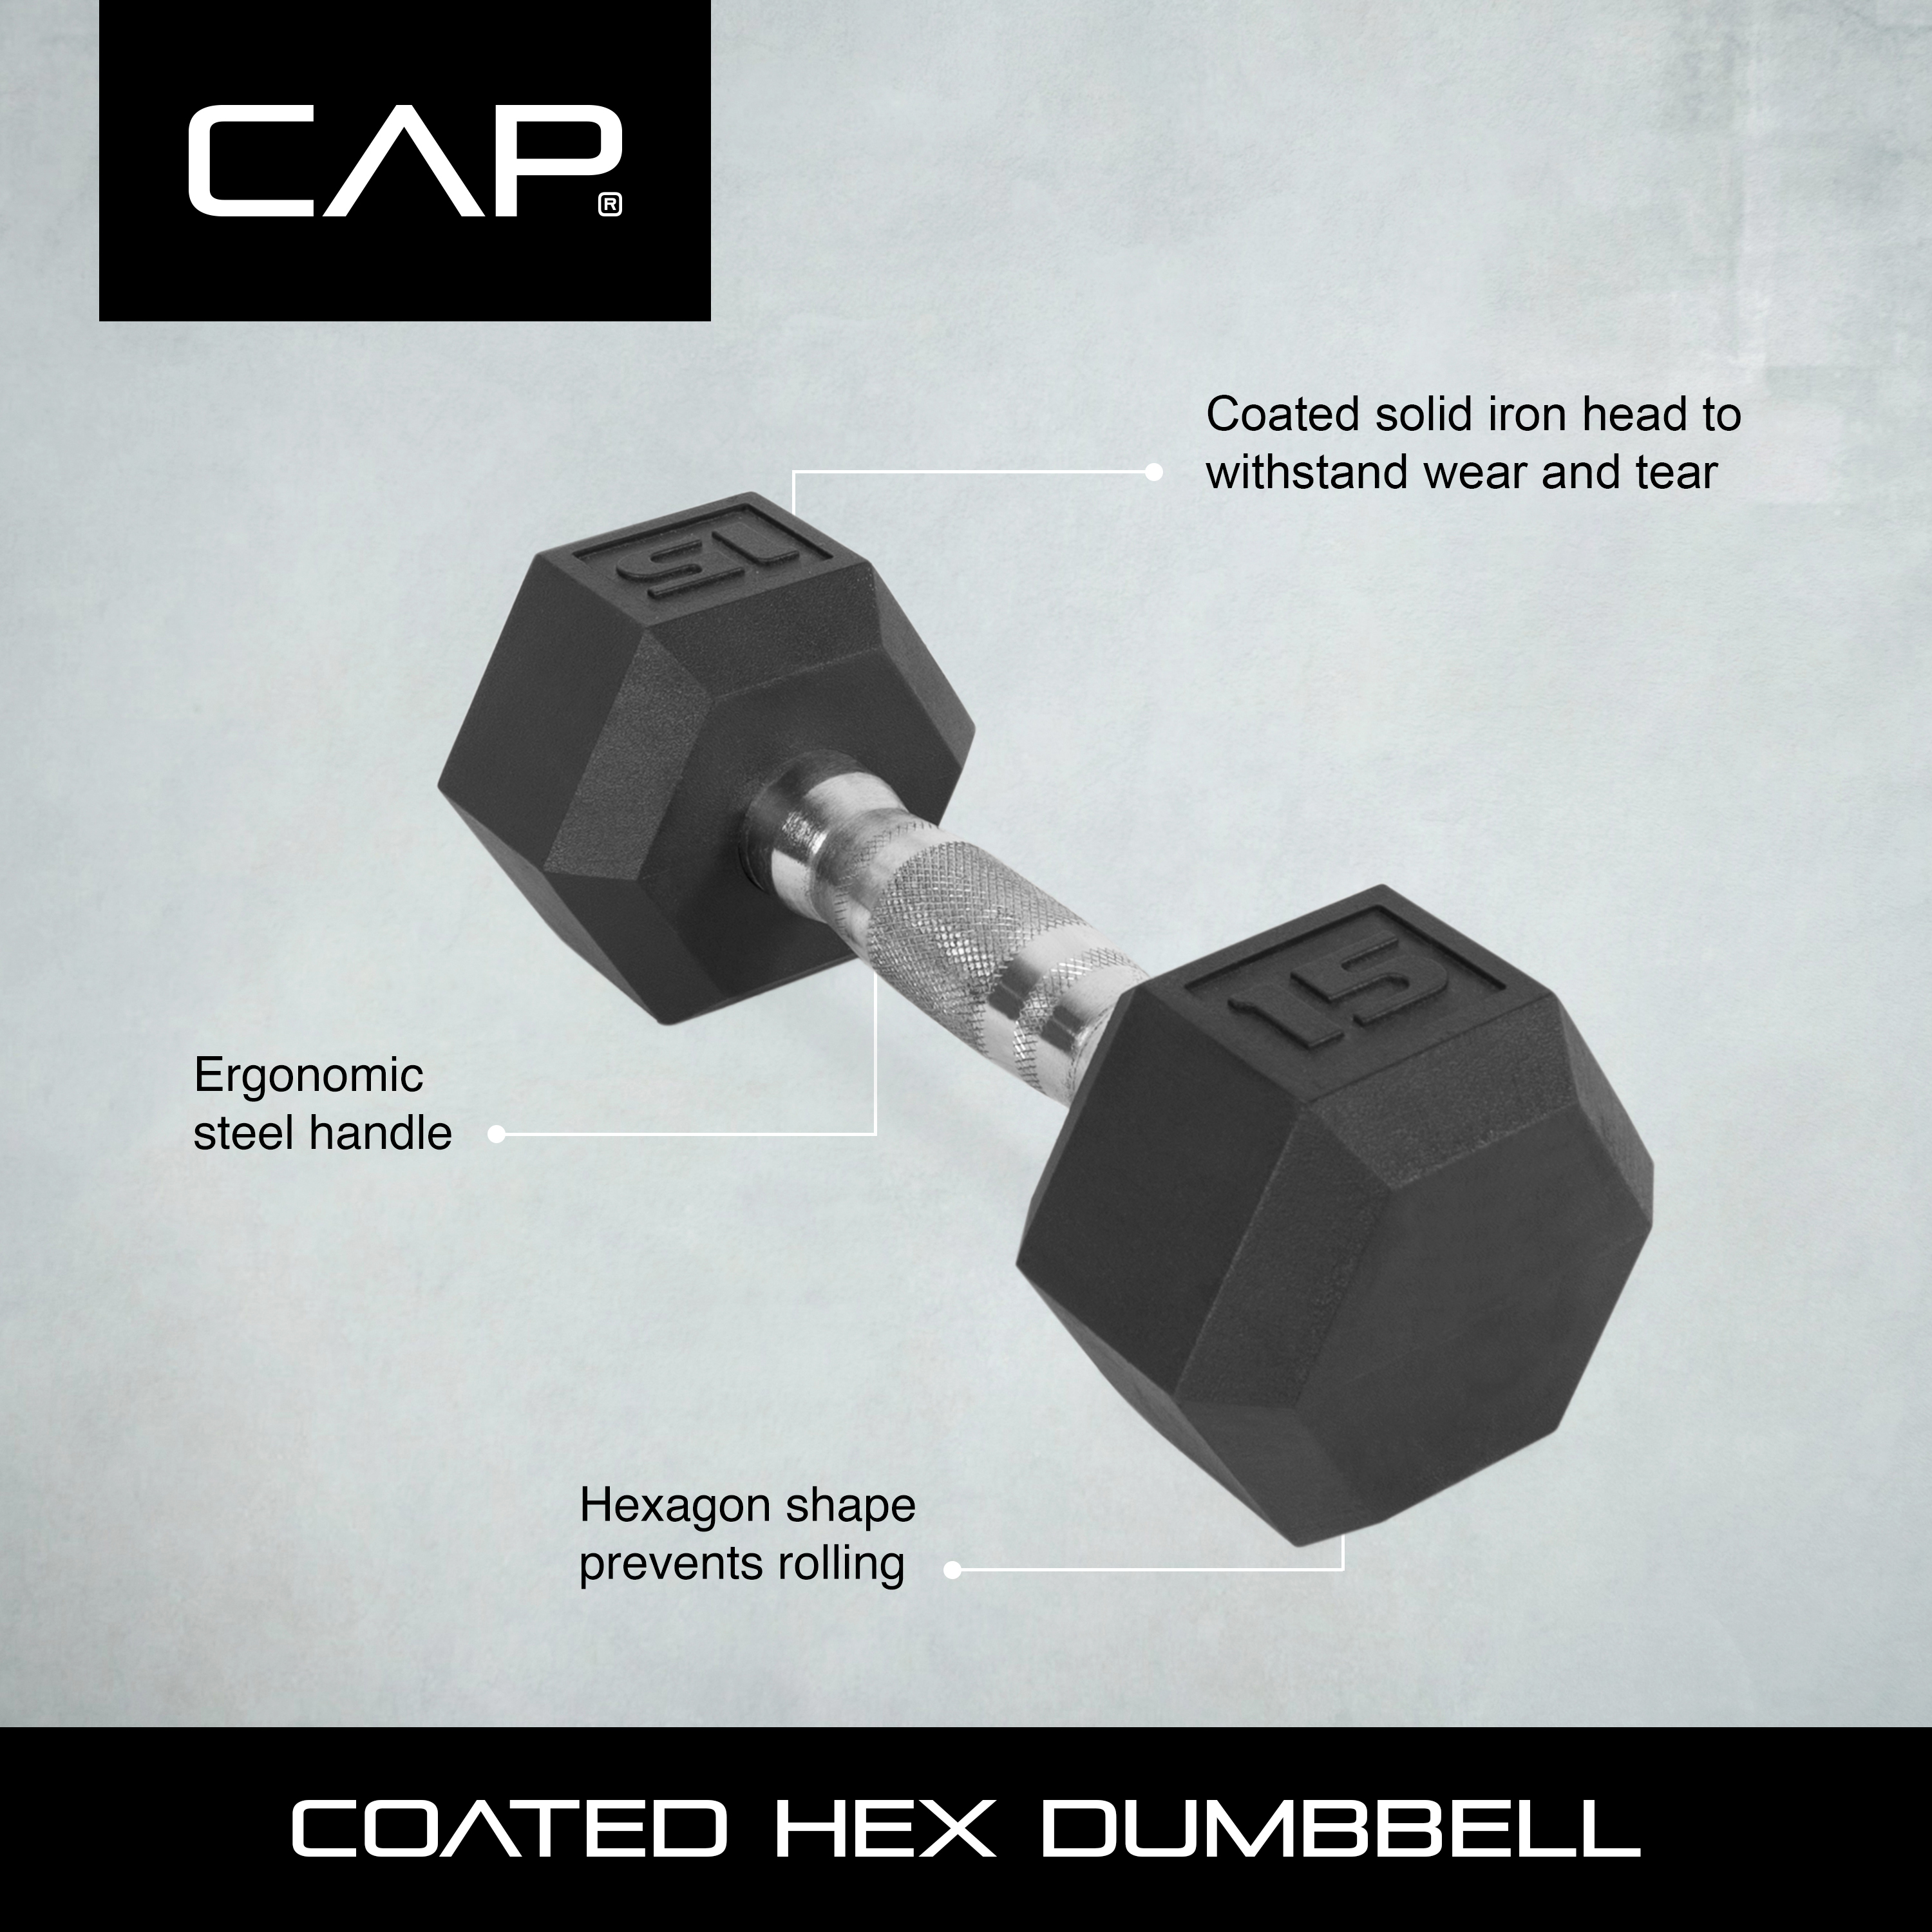 CAP Barbell, 5lb Coated Rubber Hex Dumbbell, Pair - image 4 of 5